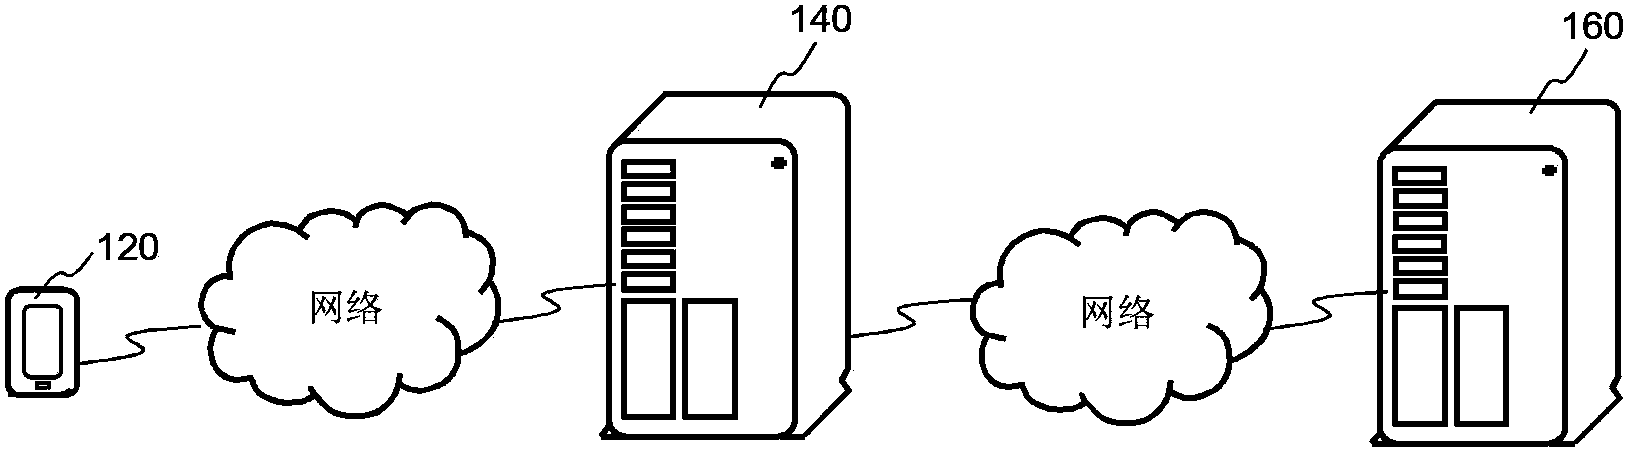 Word stock collection method, webpage rendering method, device and system